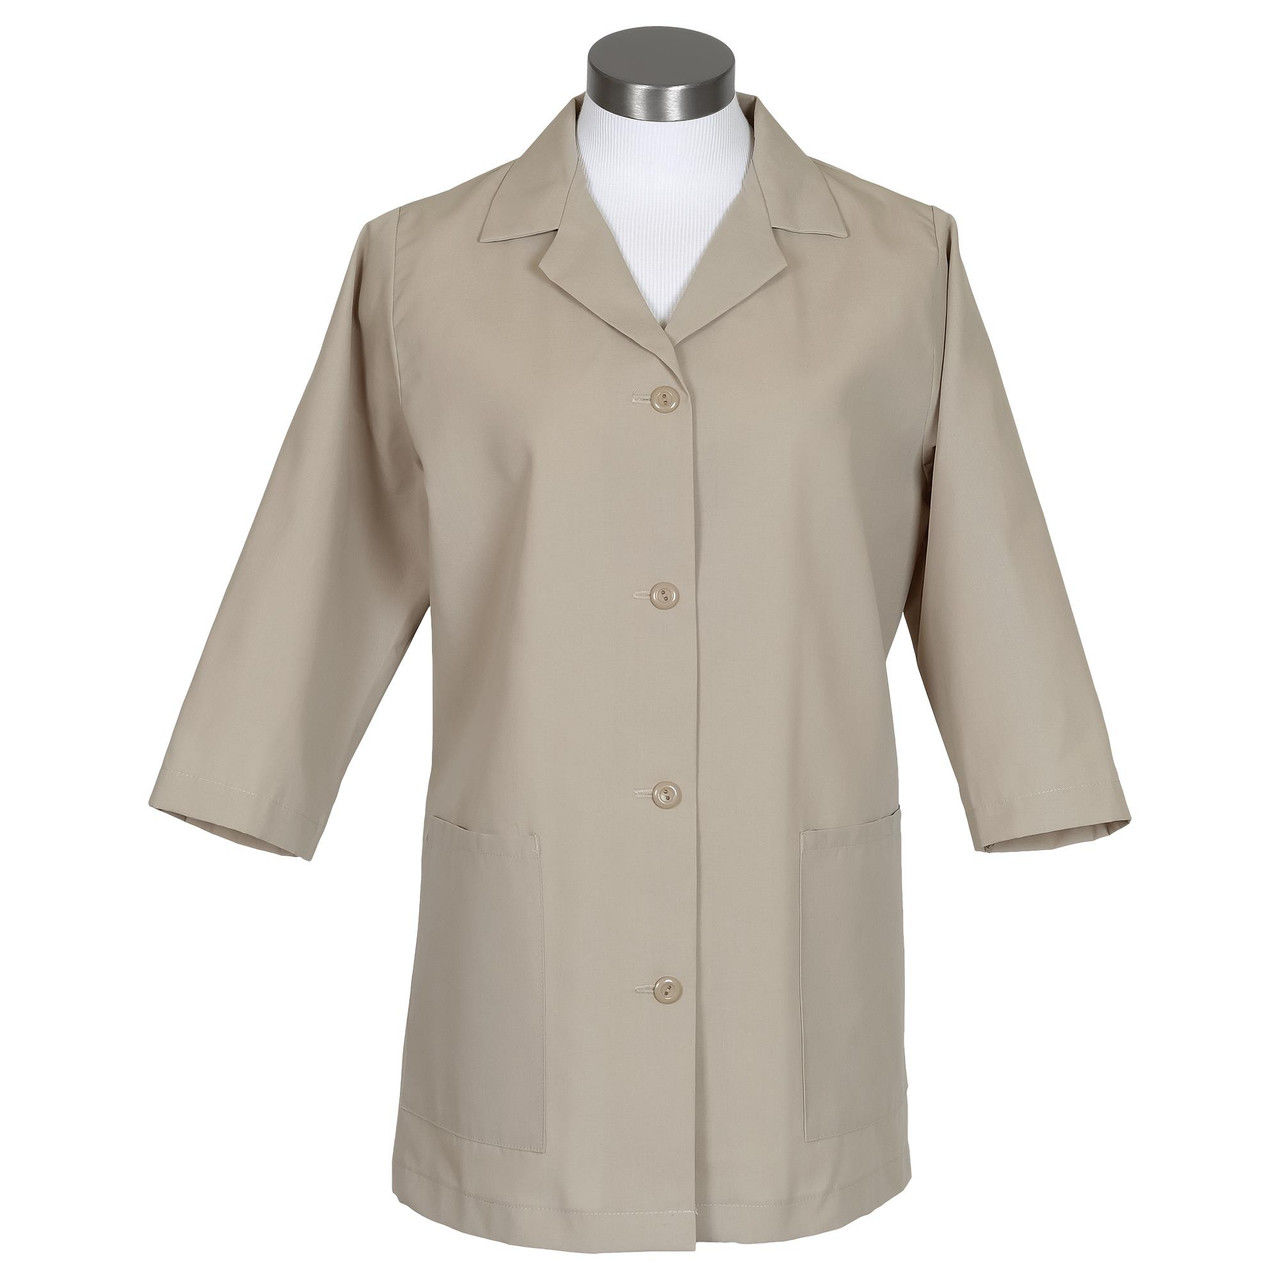 Can you describe the design of the tan smock in the product 'Female Smock, Tan, Fame 72'?